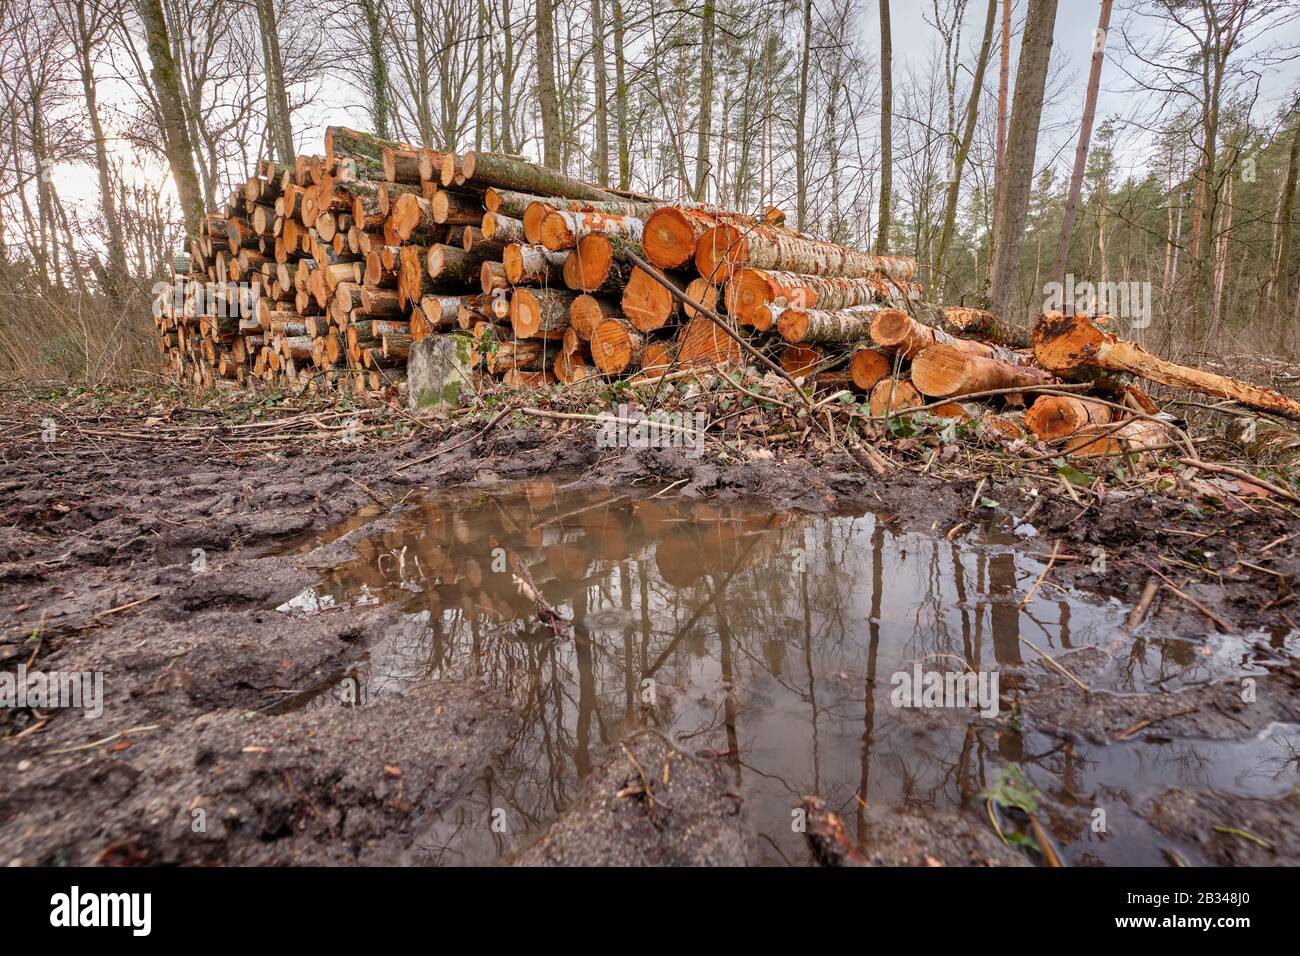 Landscape shot with a woodpile in the forest with tree trunks felld because of pest infestation and a puddle in a tractor track in the foreground. See Stock Photo